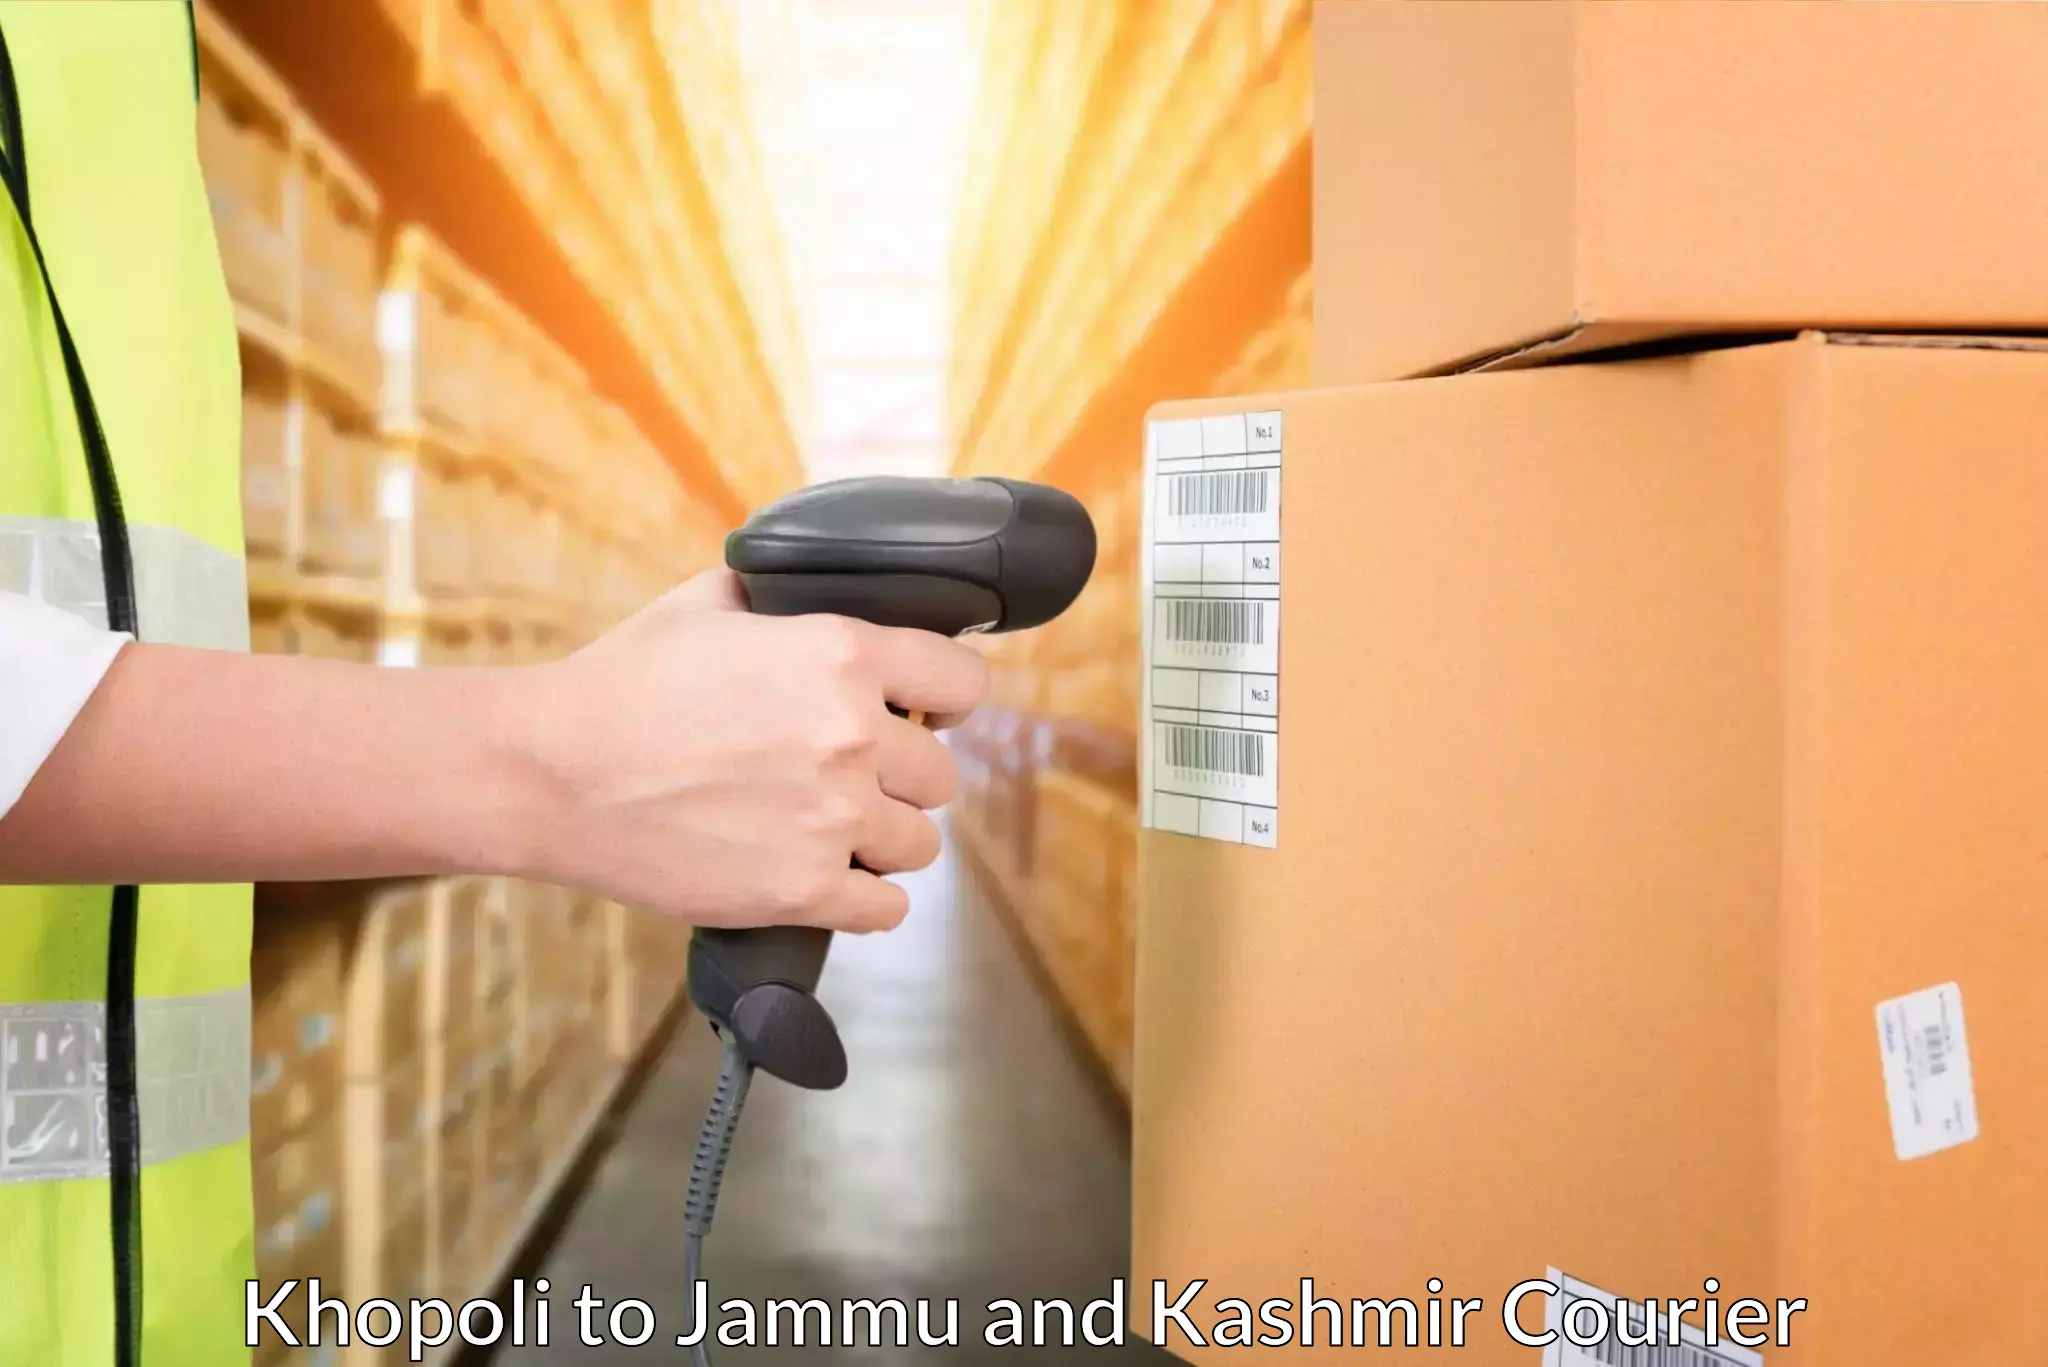 Overnight delivery services in Khopoli to Jammu and Kashmir